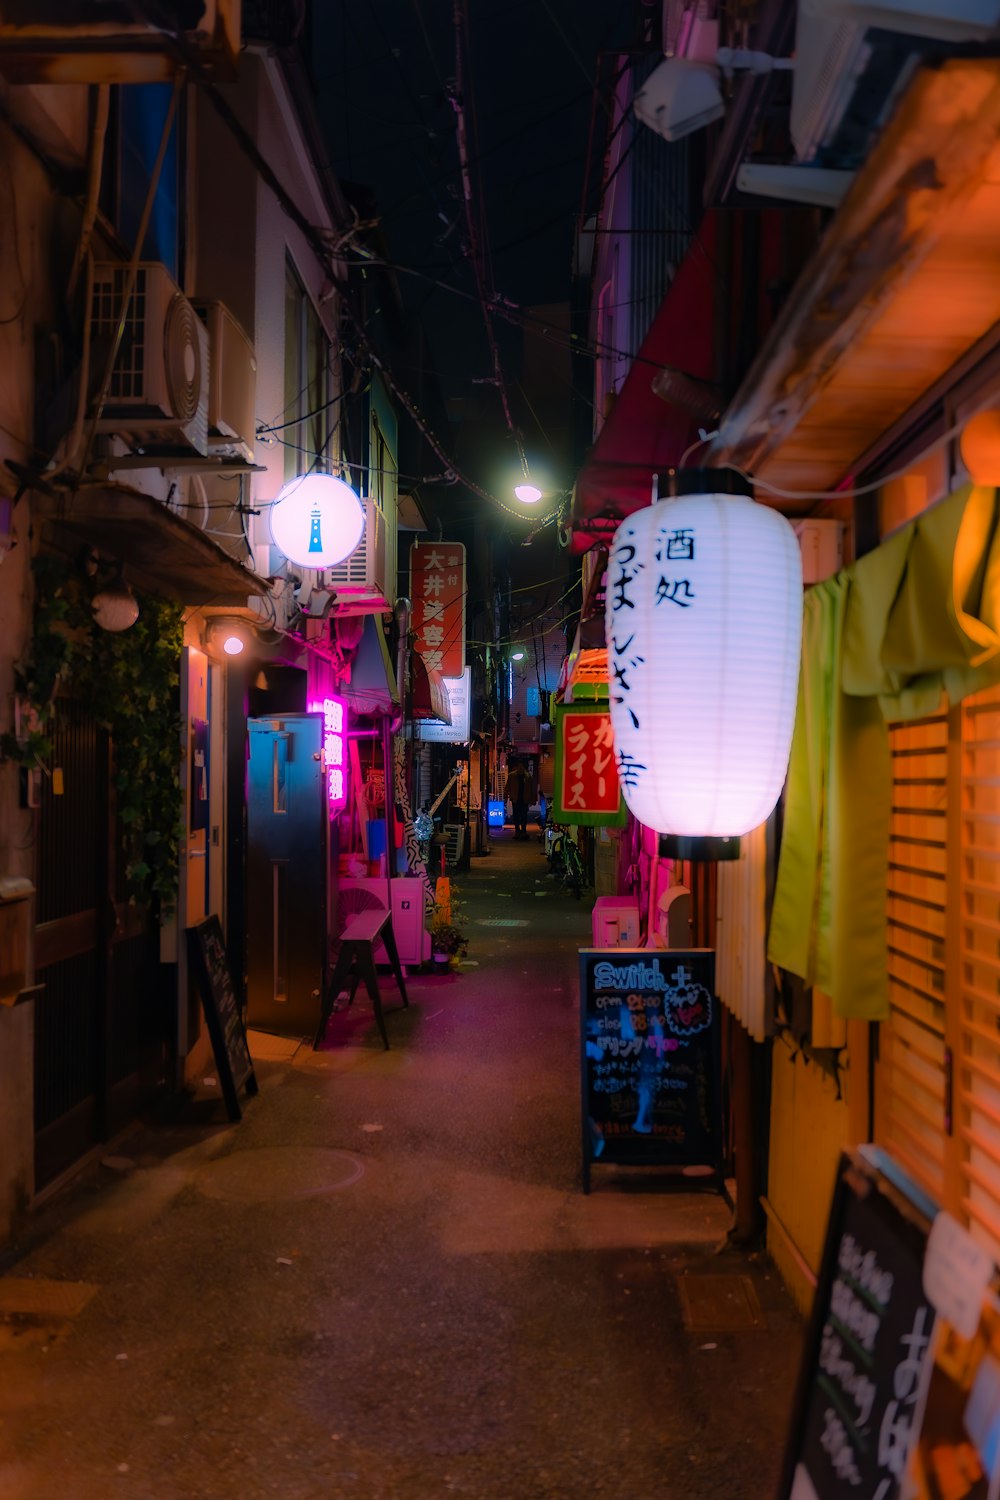 a narrow alley way with a lantern hanging from the ceiling